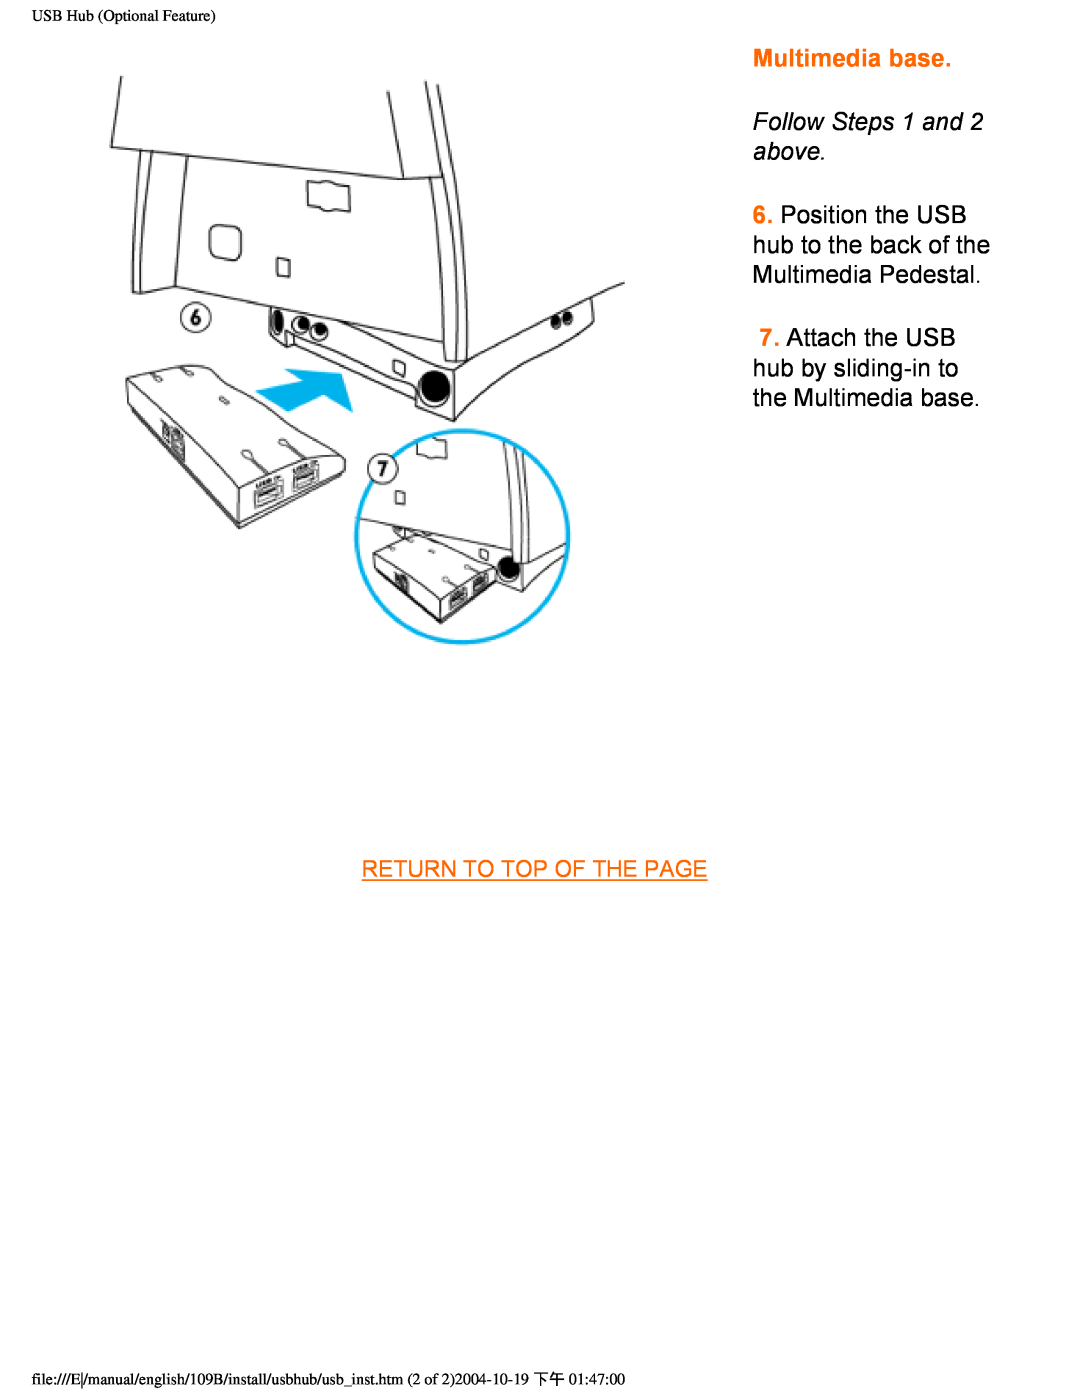 Philips 109B Multimedia base, Follow Steps 1 and 2 above, Position the USB hub to the back of the Multimedia Pedestal 